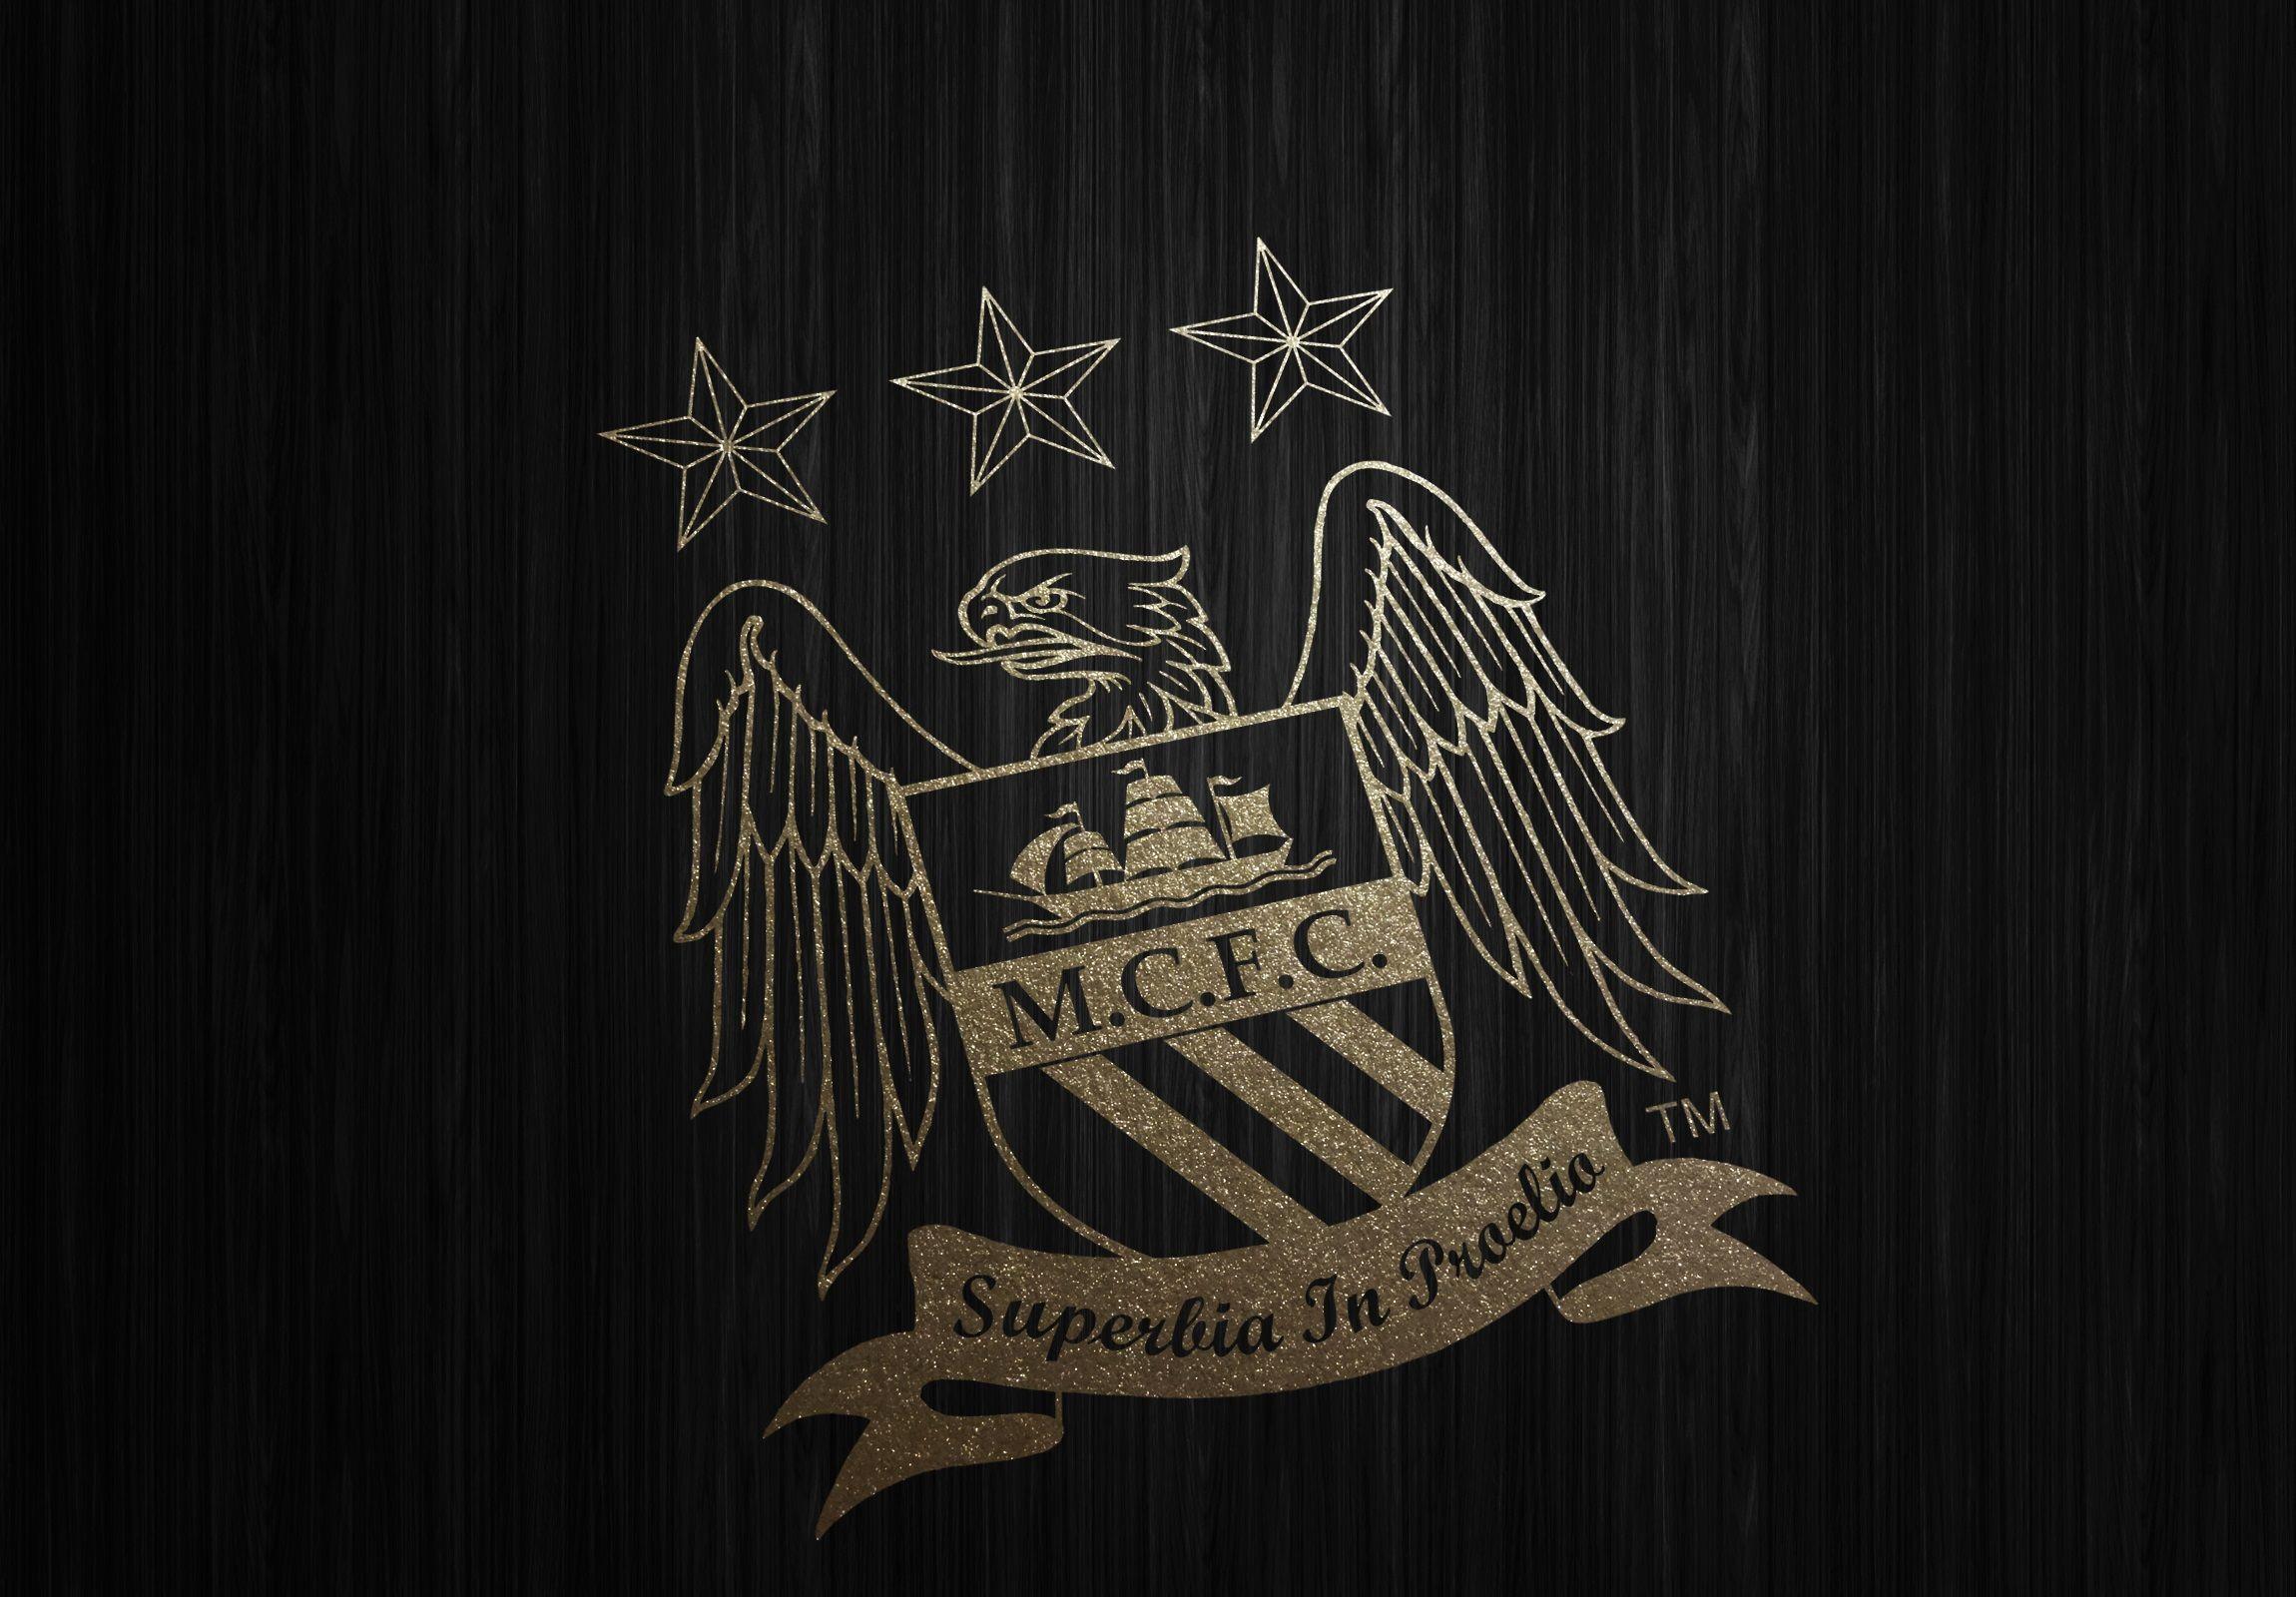 Manchester City Wallpapers Wallpapers